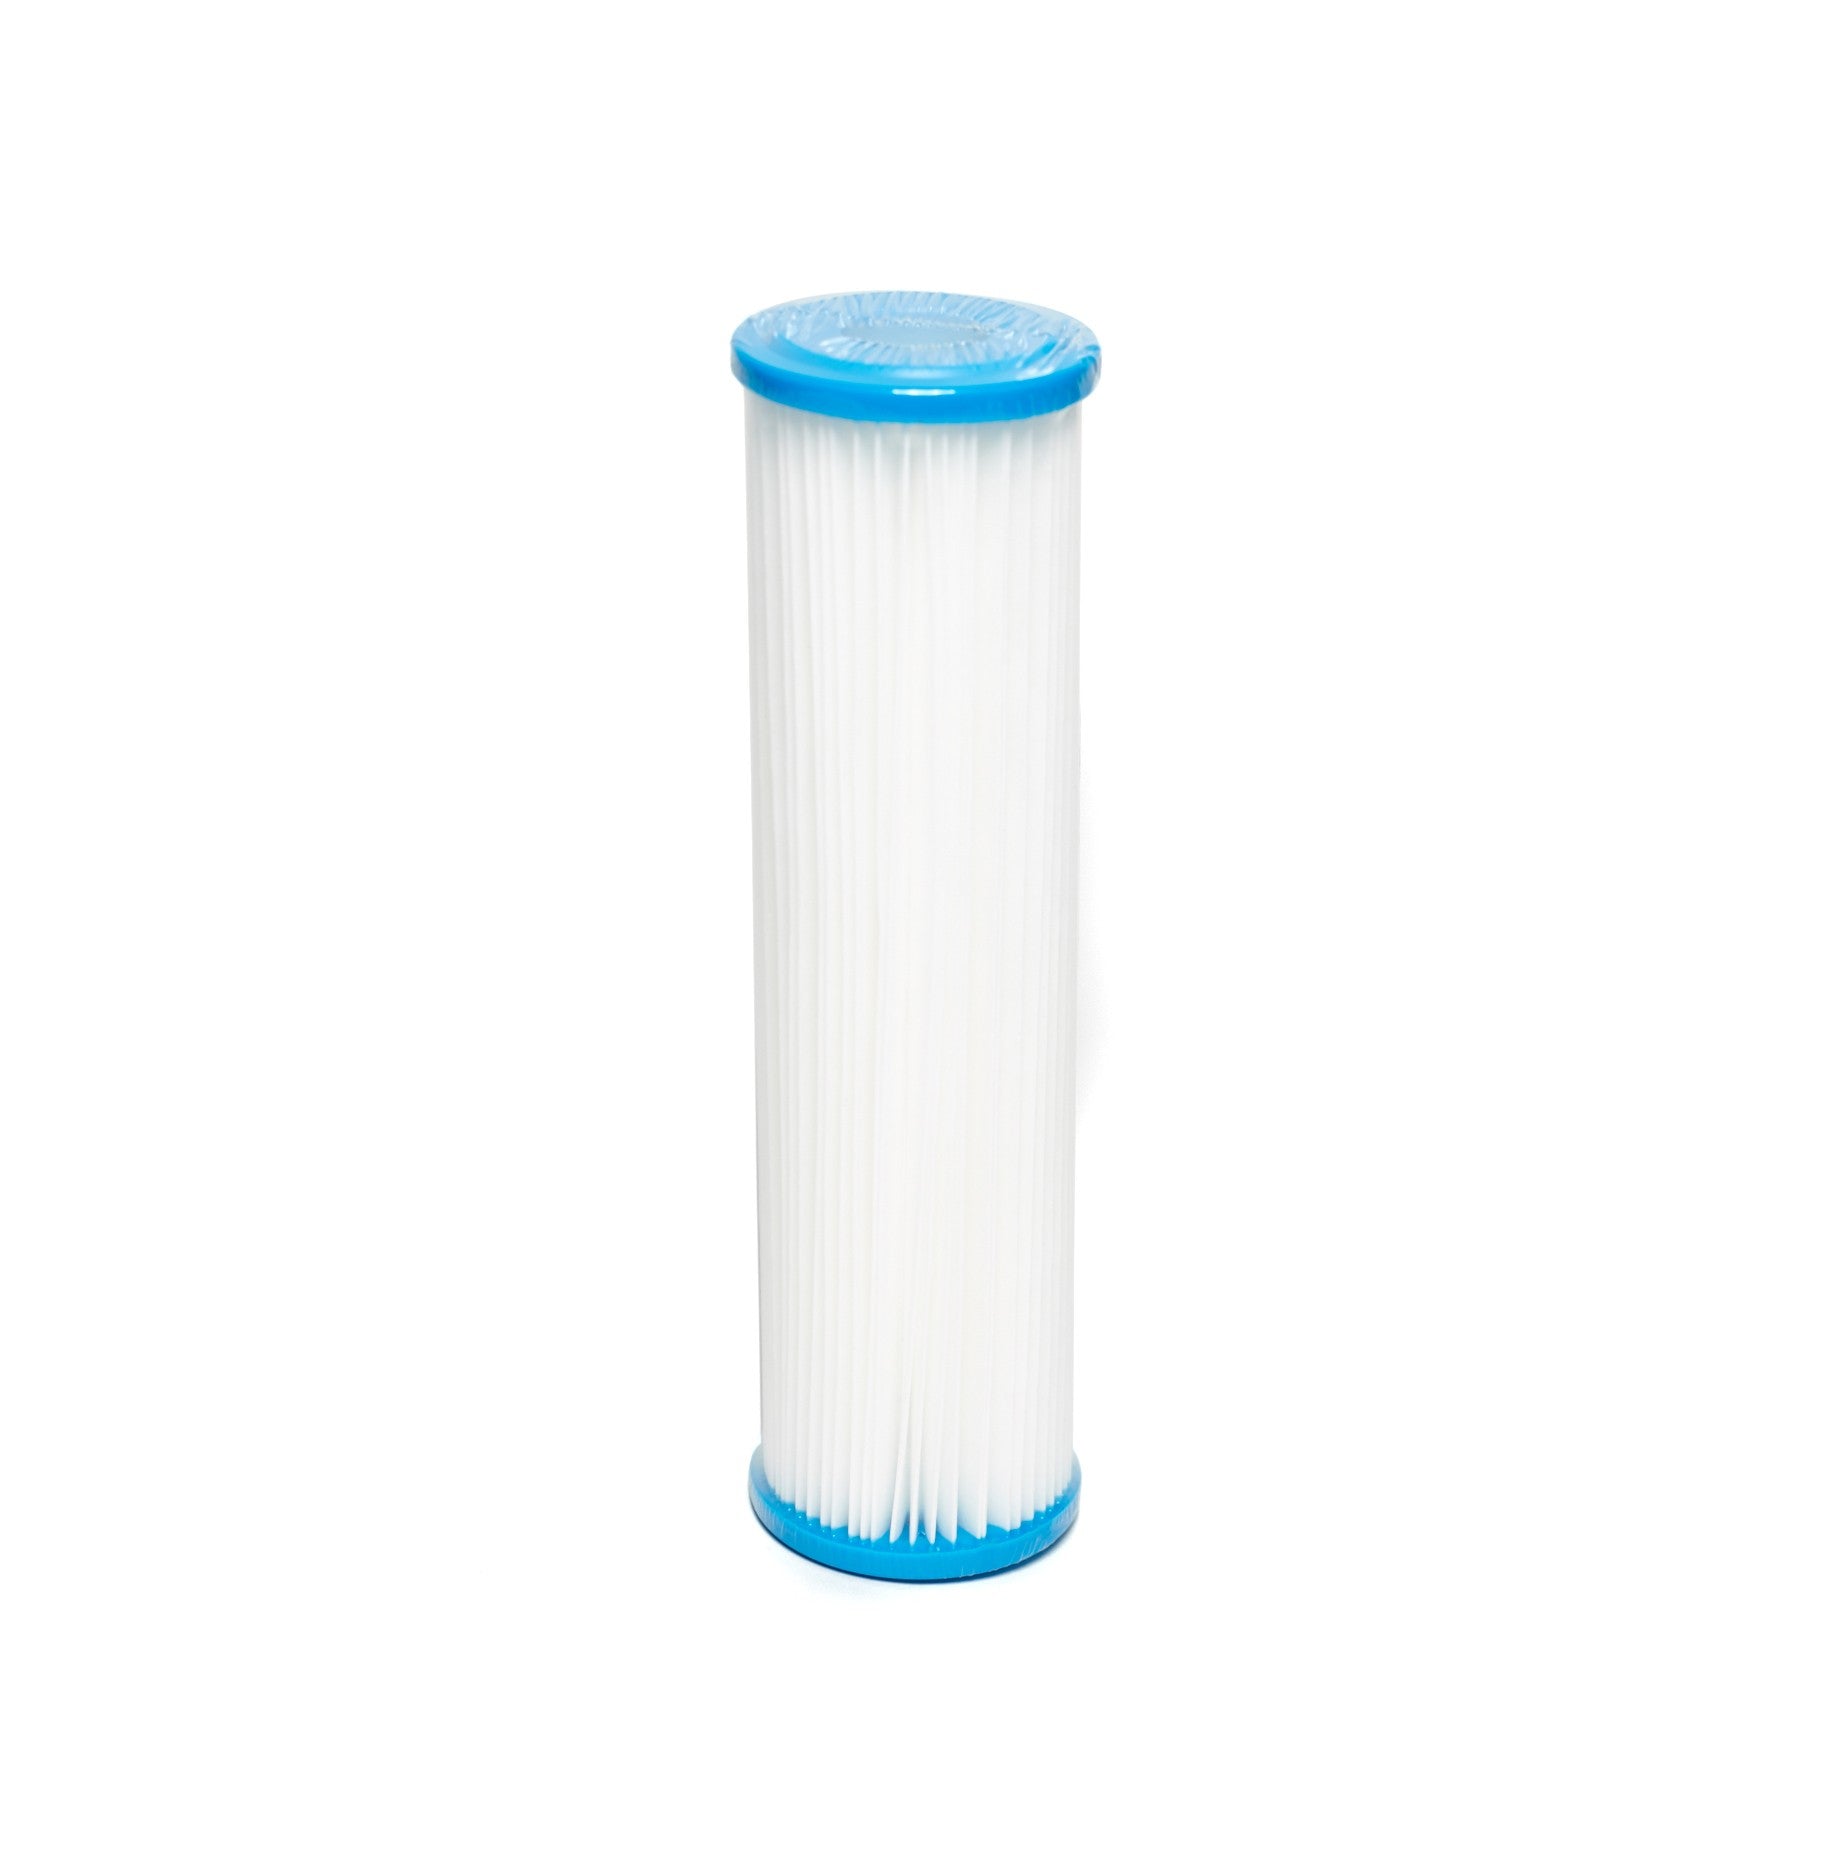 Filter - 1 Micron Washable - All Things Fermented | Home Brew Shop NZ | Supplies | Equipment